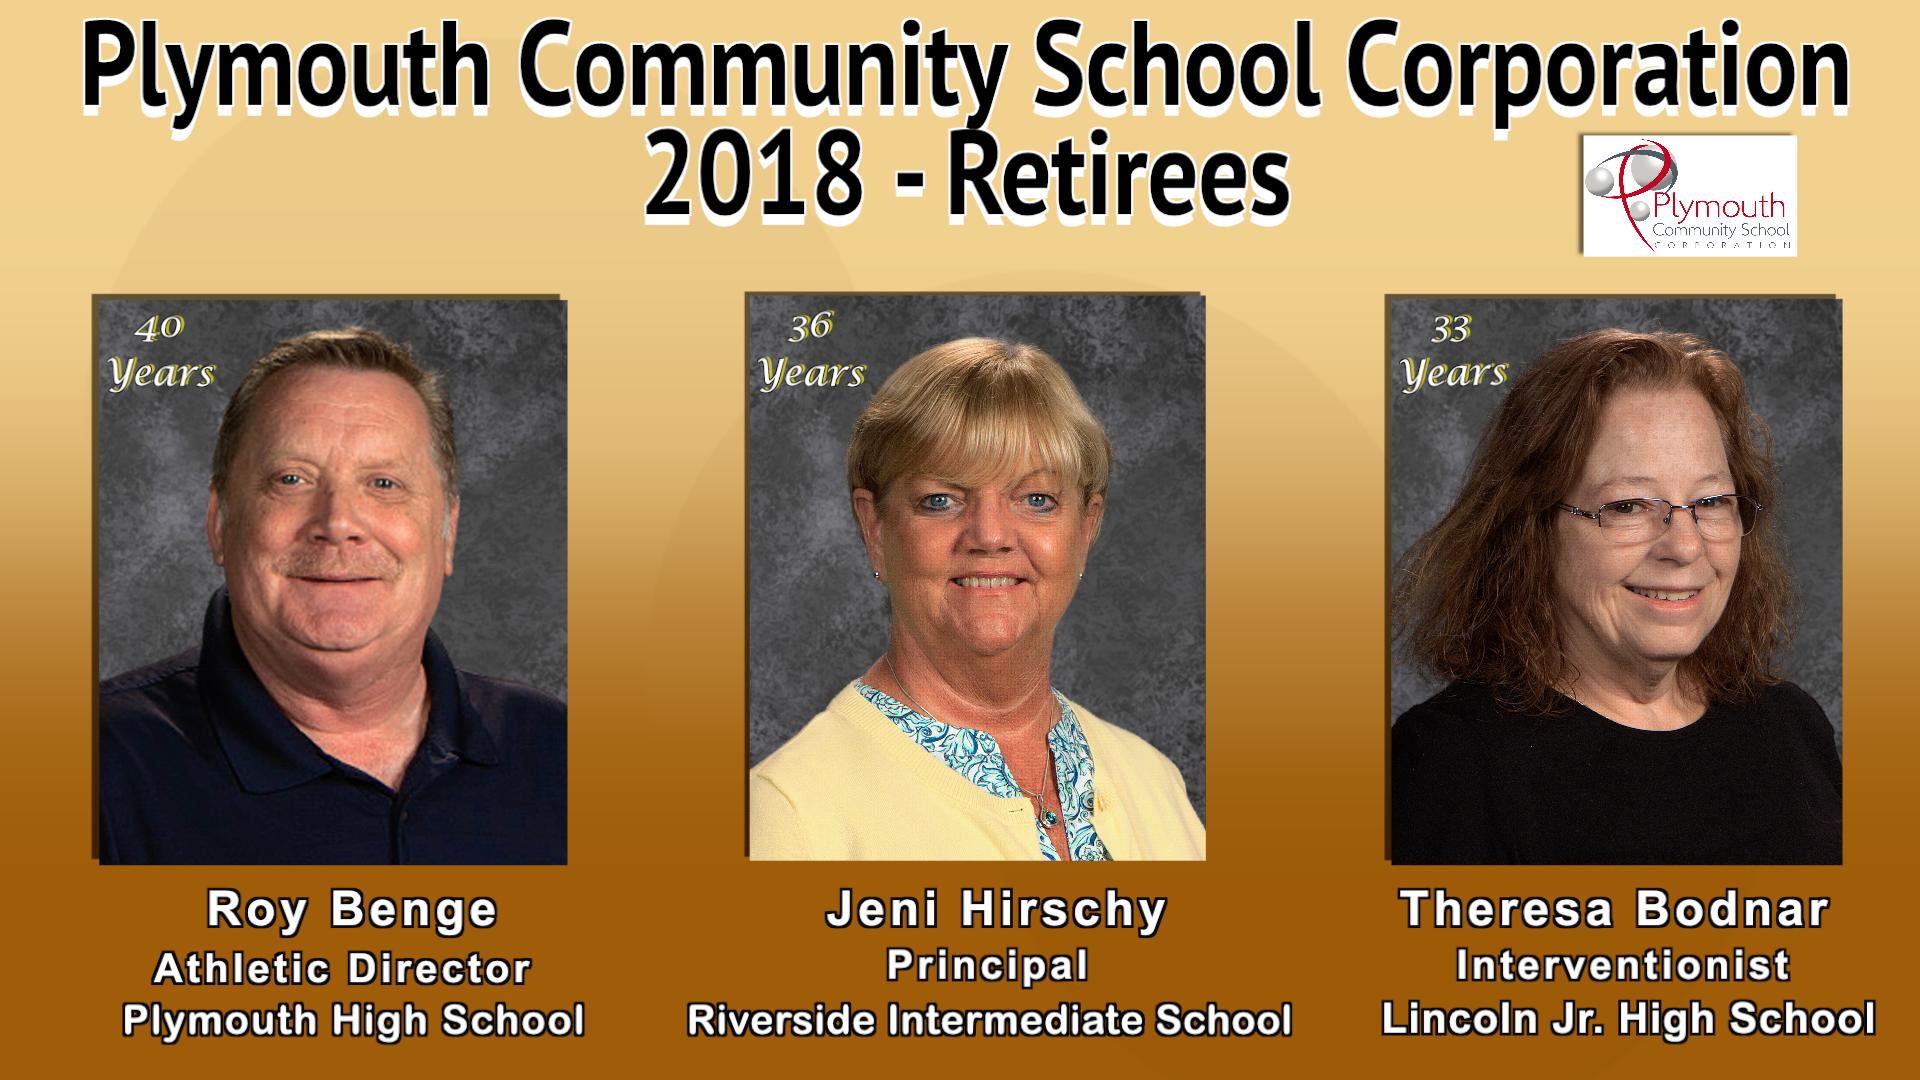 Plymouth Community School Corporation 2018 Retirees-40 Years Roy Benge Athletic Director Plymouth High School, 36 years Jeni Hirschy Principal Riverside Intermediate School, 33 years Theresa Bodnar Interventionist Lincoln Jr. High School and photos with a Plymouth Community School Corporation Logo